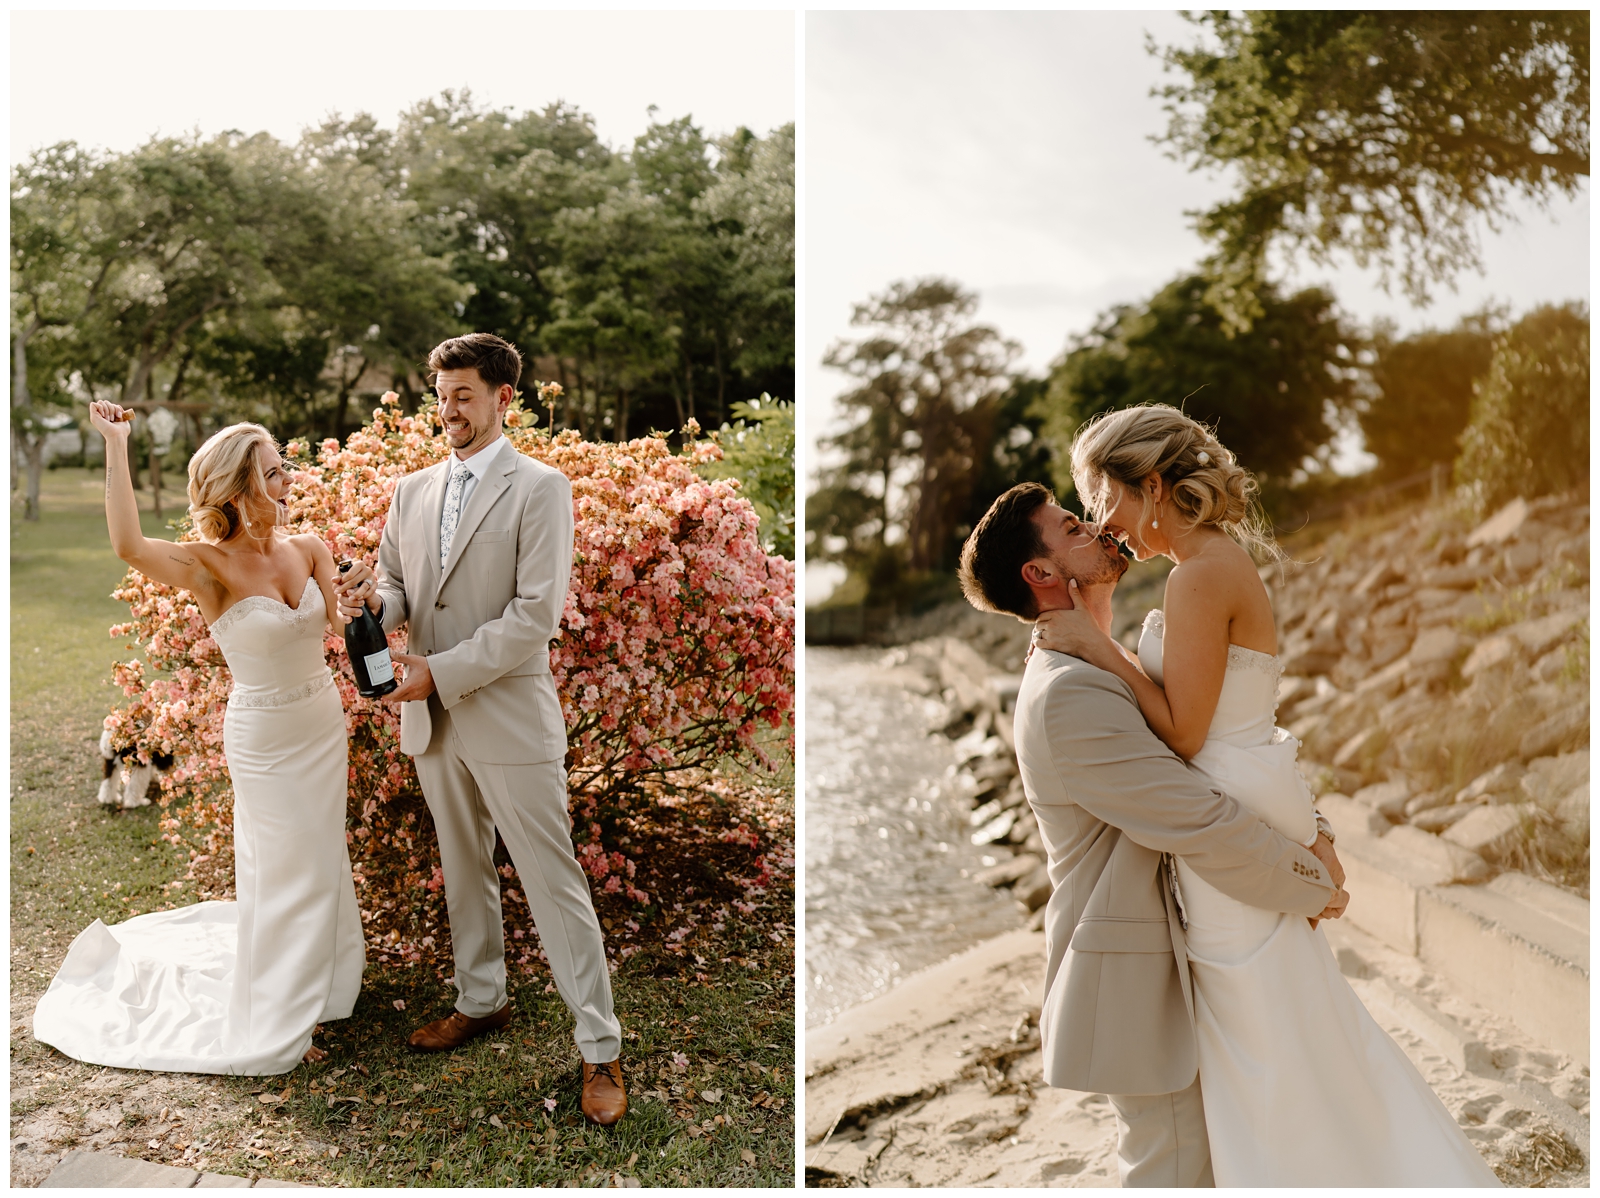 Outer Banks Elopement newlywed portraits at the Westside Inn, by NC wedding photographer